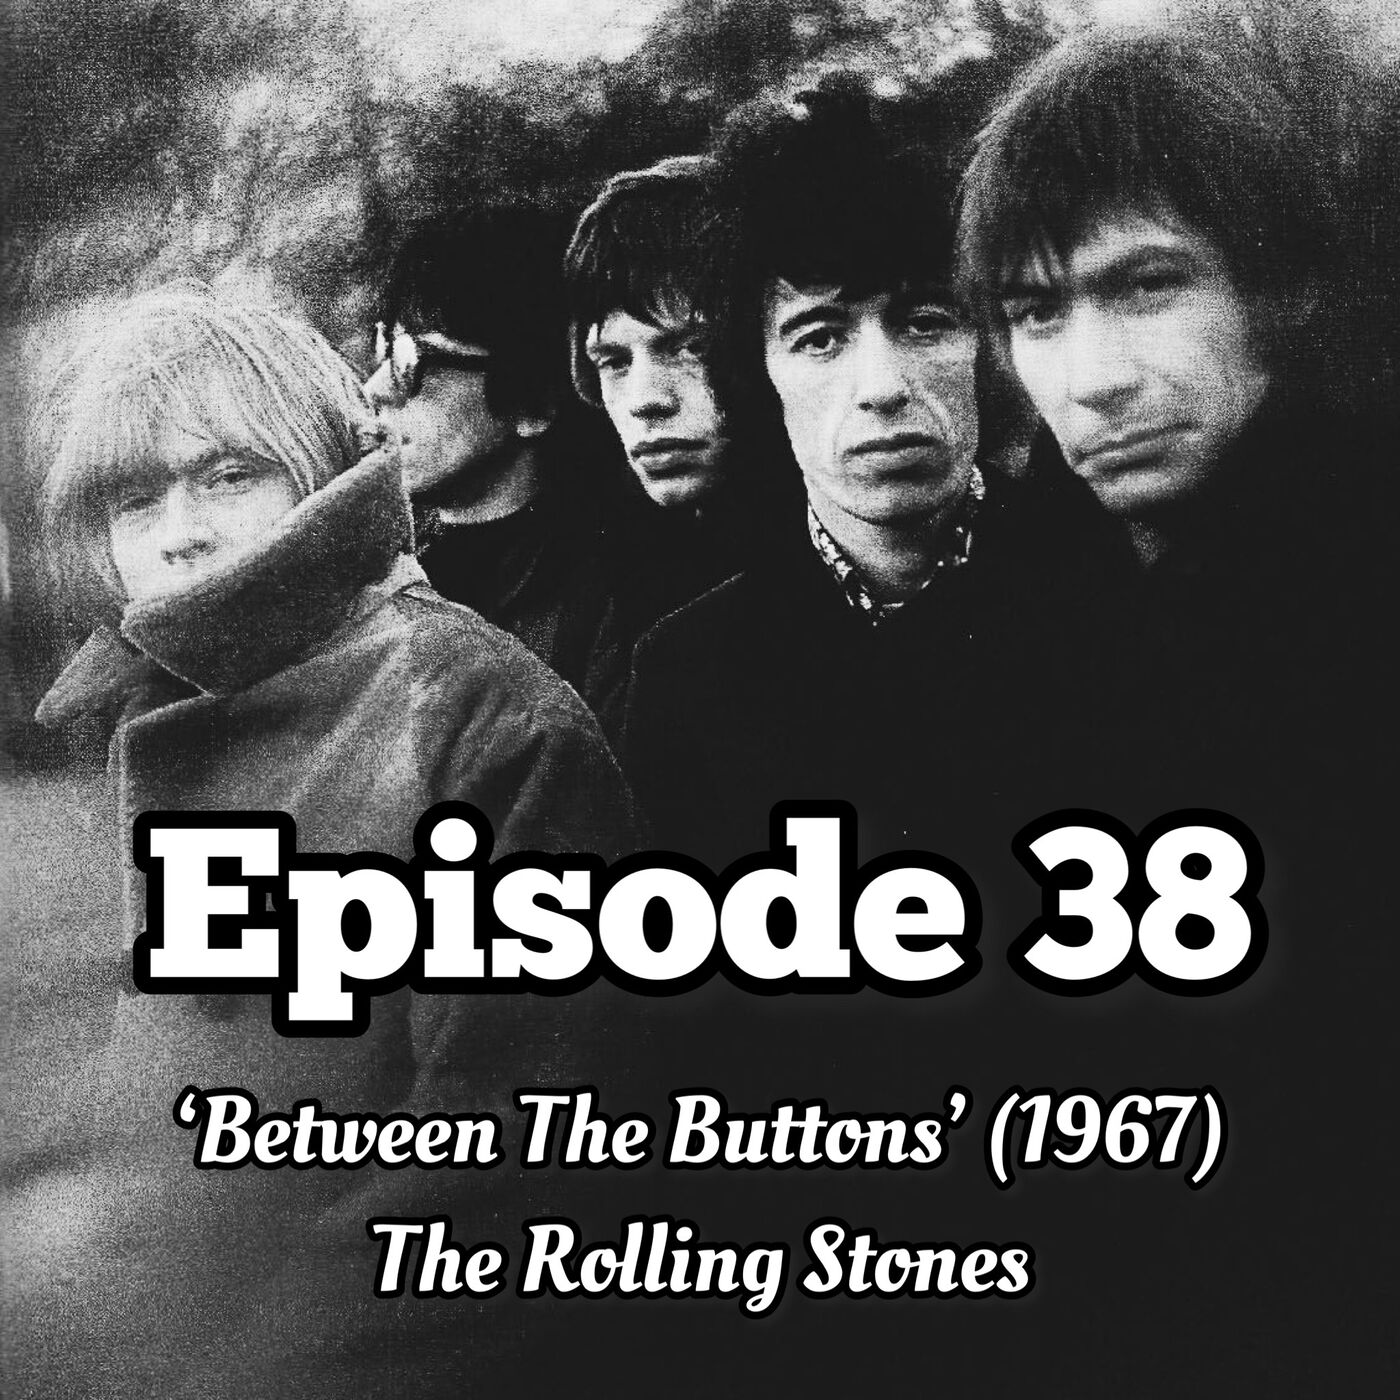 38. 'Between The Buttons' - The Rolling Stones (1967)